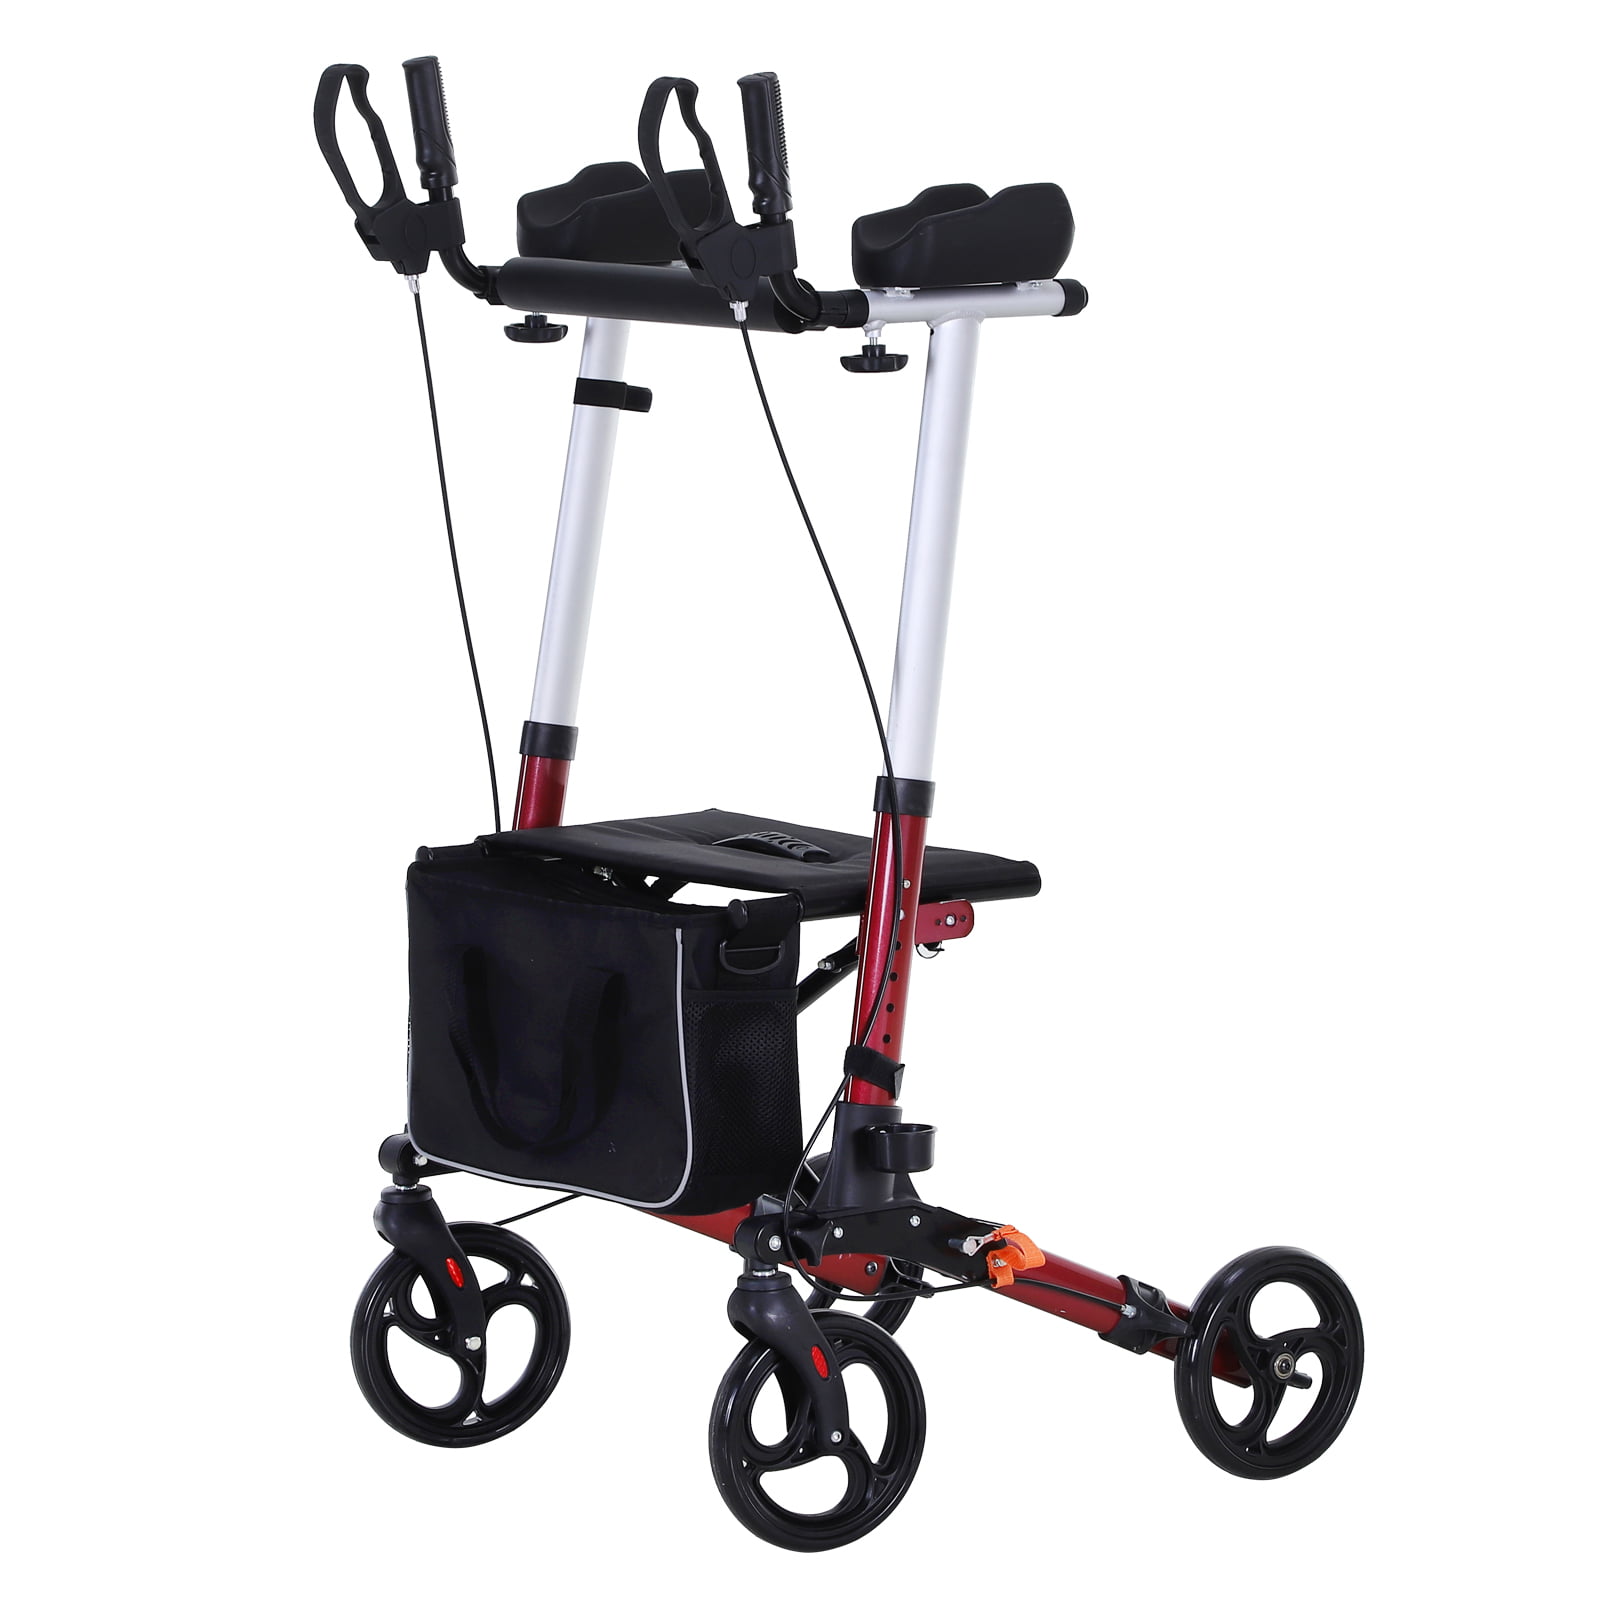 HOMCOM Folding Rollator Walker With Seat and Bag, Wheeled Rolling Medical Height Adjustable ...